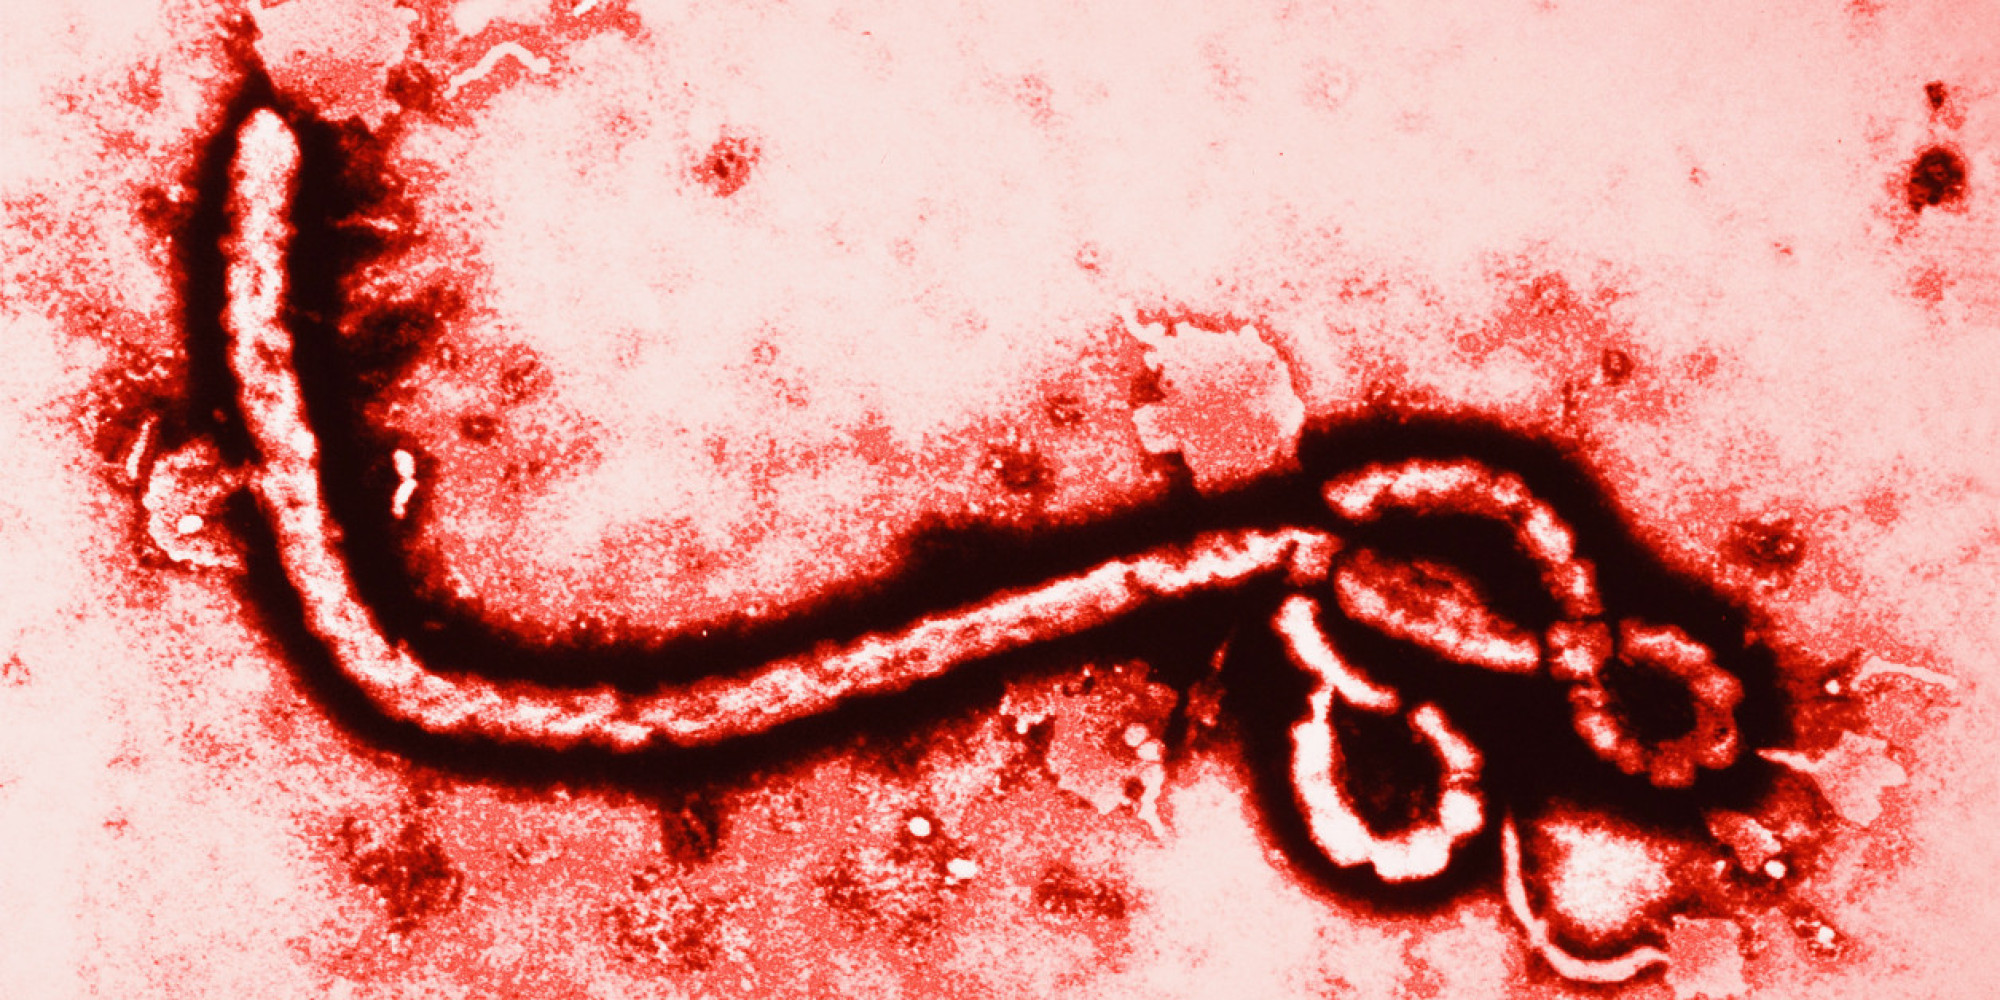 Homeopaths offered services to prevent and treat Ebola